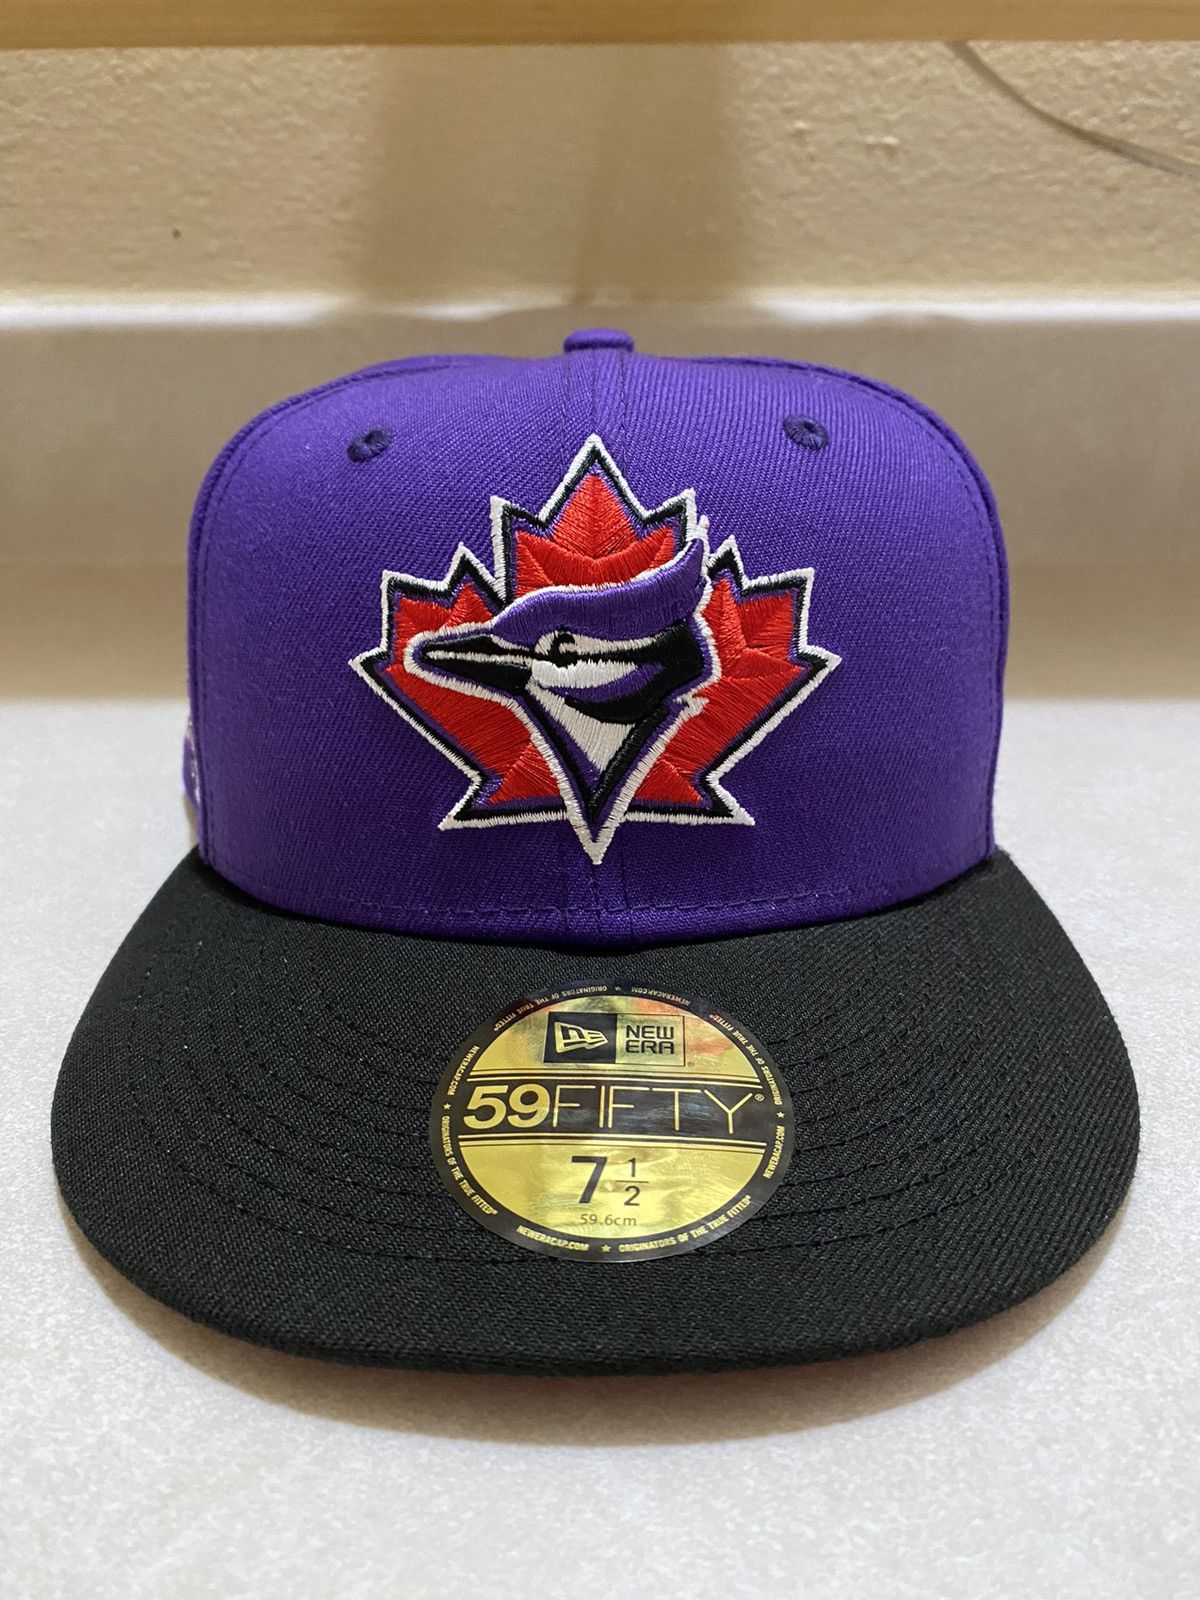 This Blue Jays cap by @baldysmaldy in collaboration with Hat Club